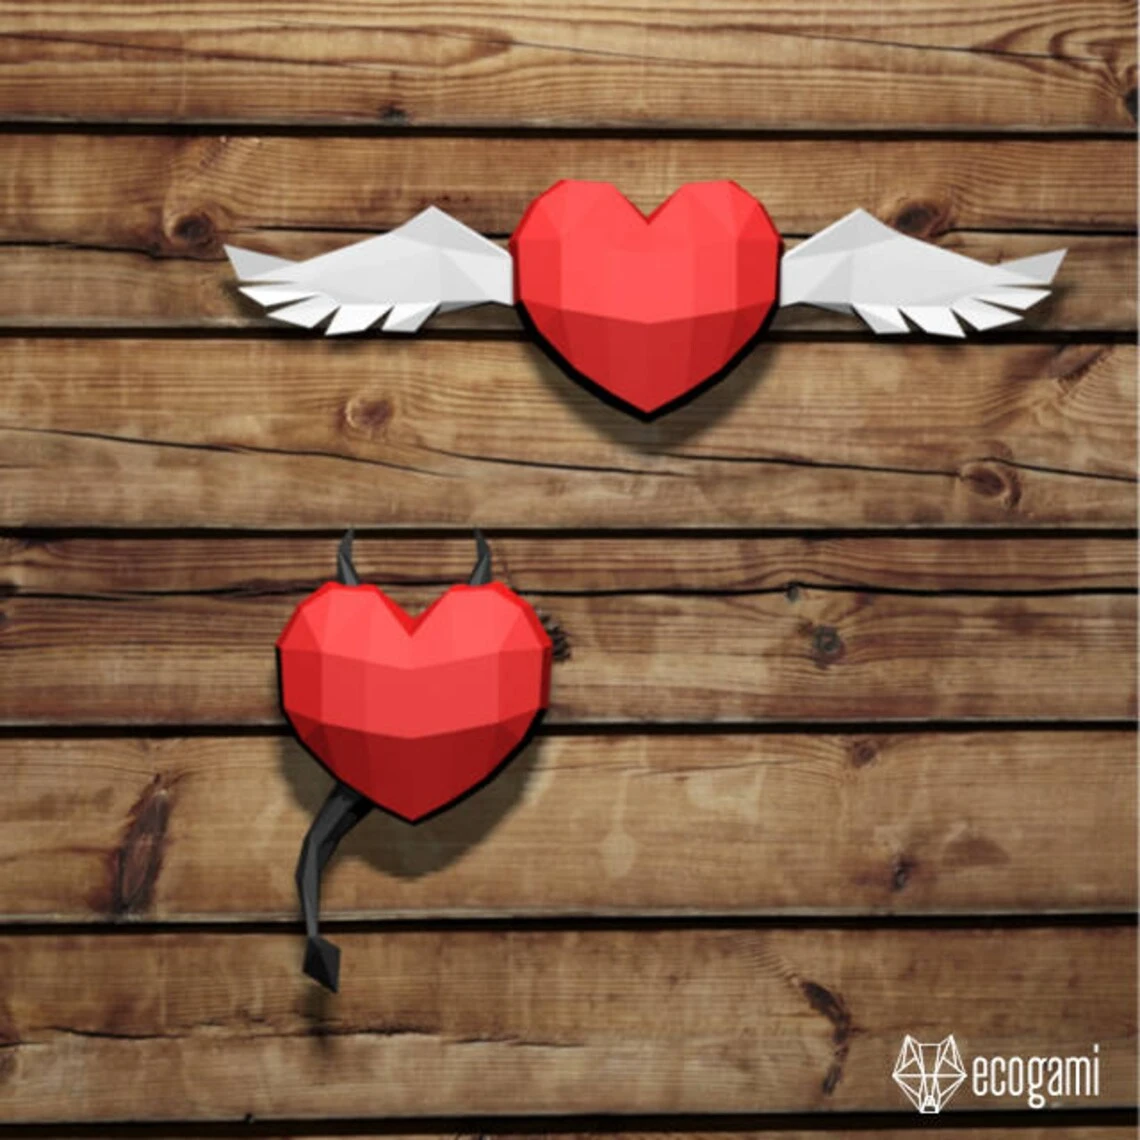 Heart with Wings Valentine papercraft trophy, printable 3D puzzle, papercraft Pdf template to make your lovers day wall decor